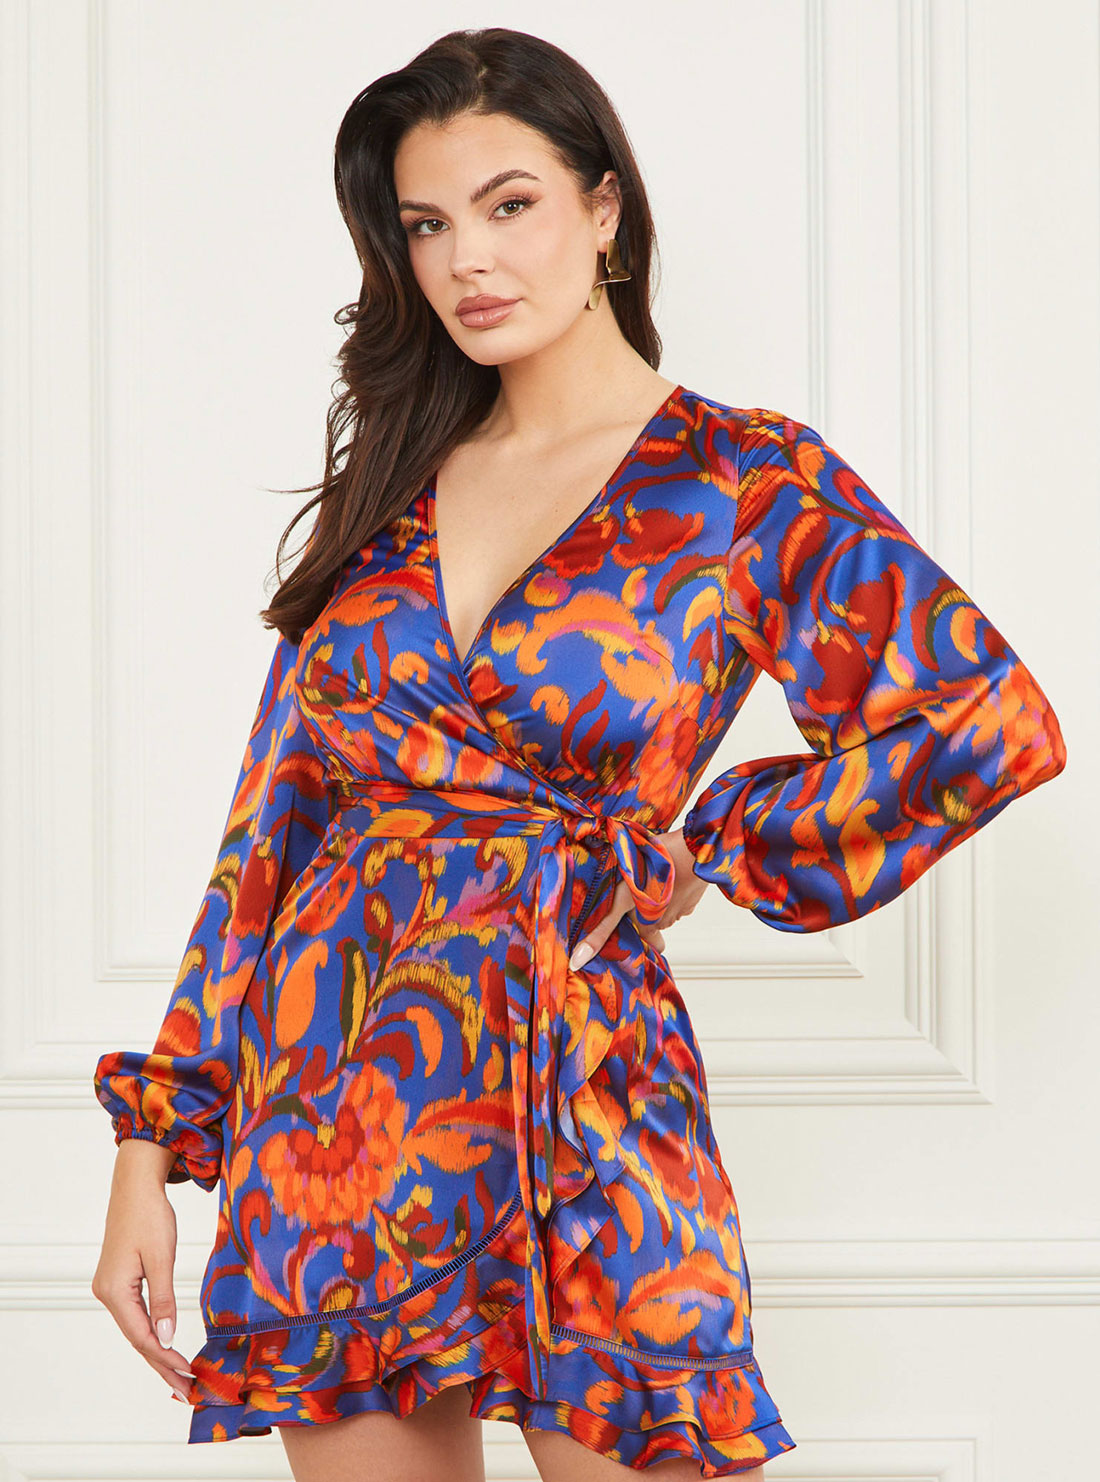 Marciano Betty Blue Wrap Dress | GUESS Women's Apparel | front view